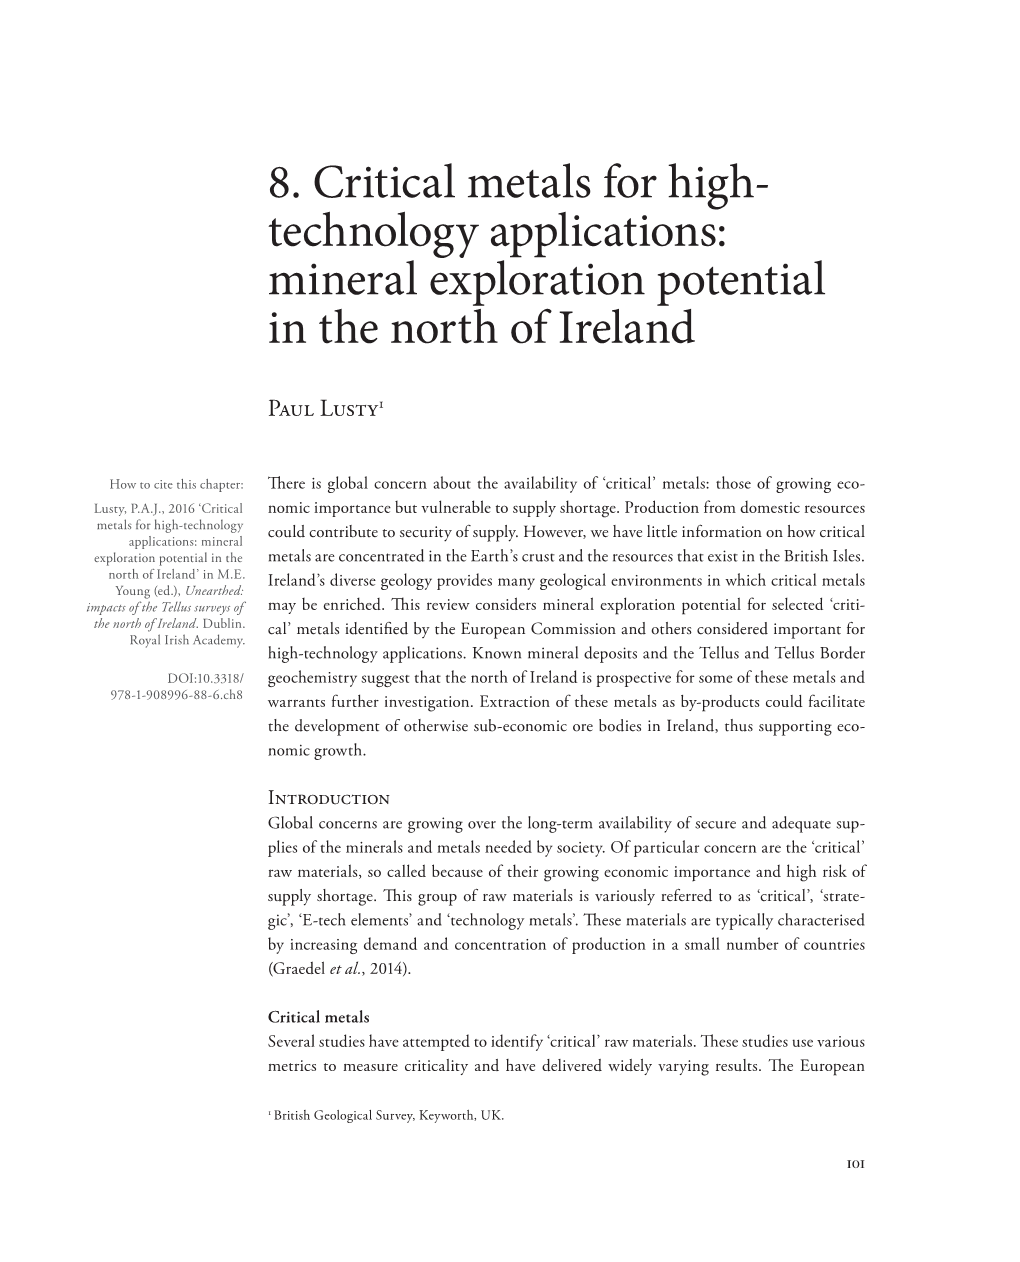 Mineral Exploration Potential in the North of Ireland